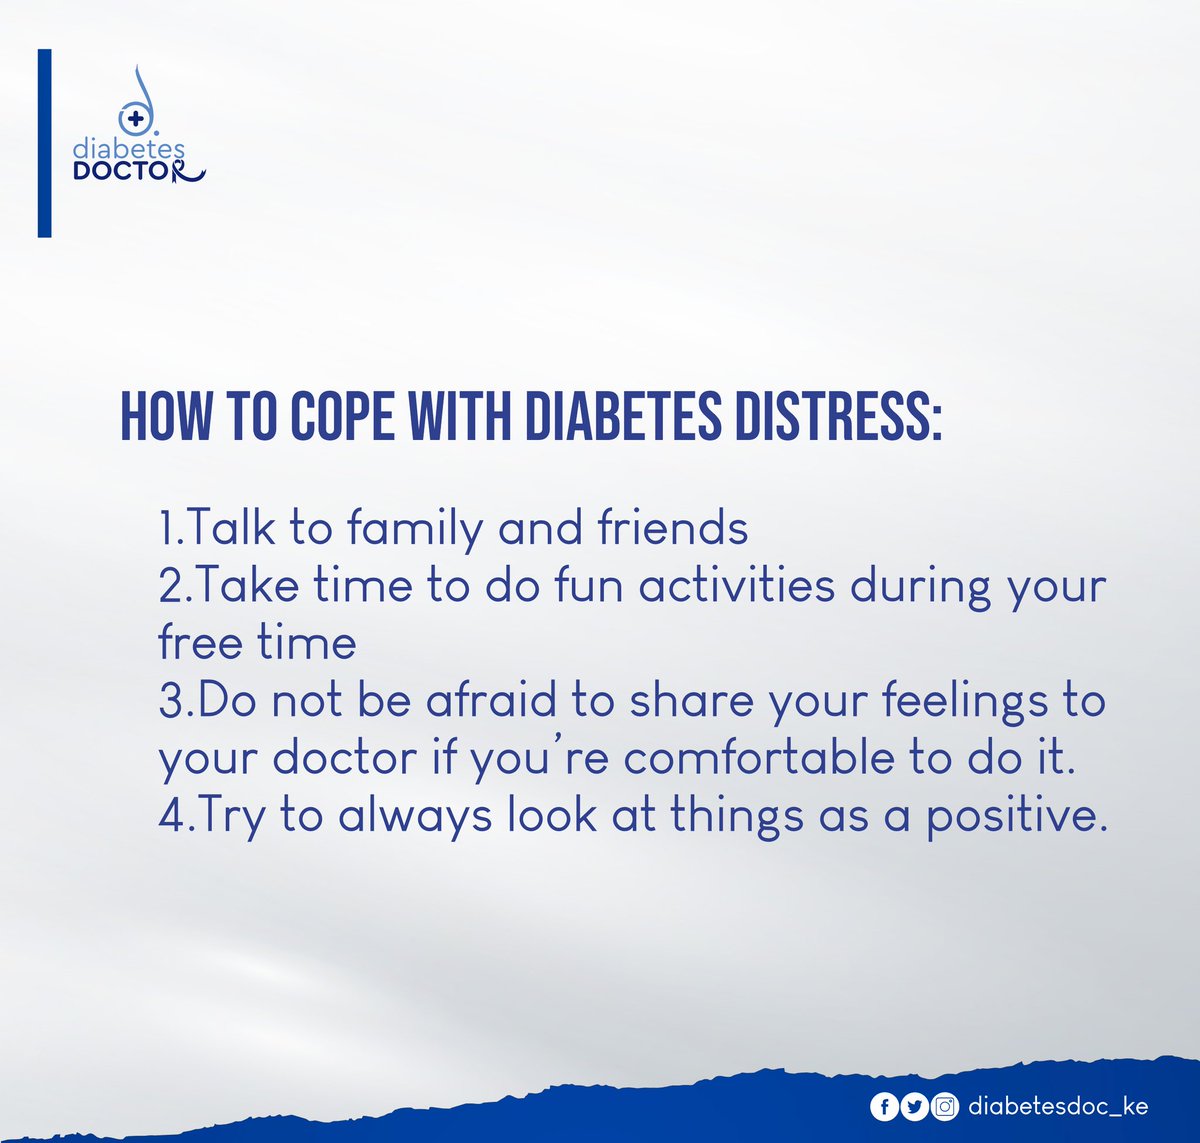 Sometimes dealing with diabetes distress can be difficult. But you can find a way to cope with it.

#yourmentalhealthmatters
#keepyoursugarsincheck